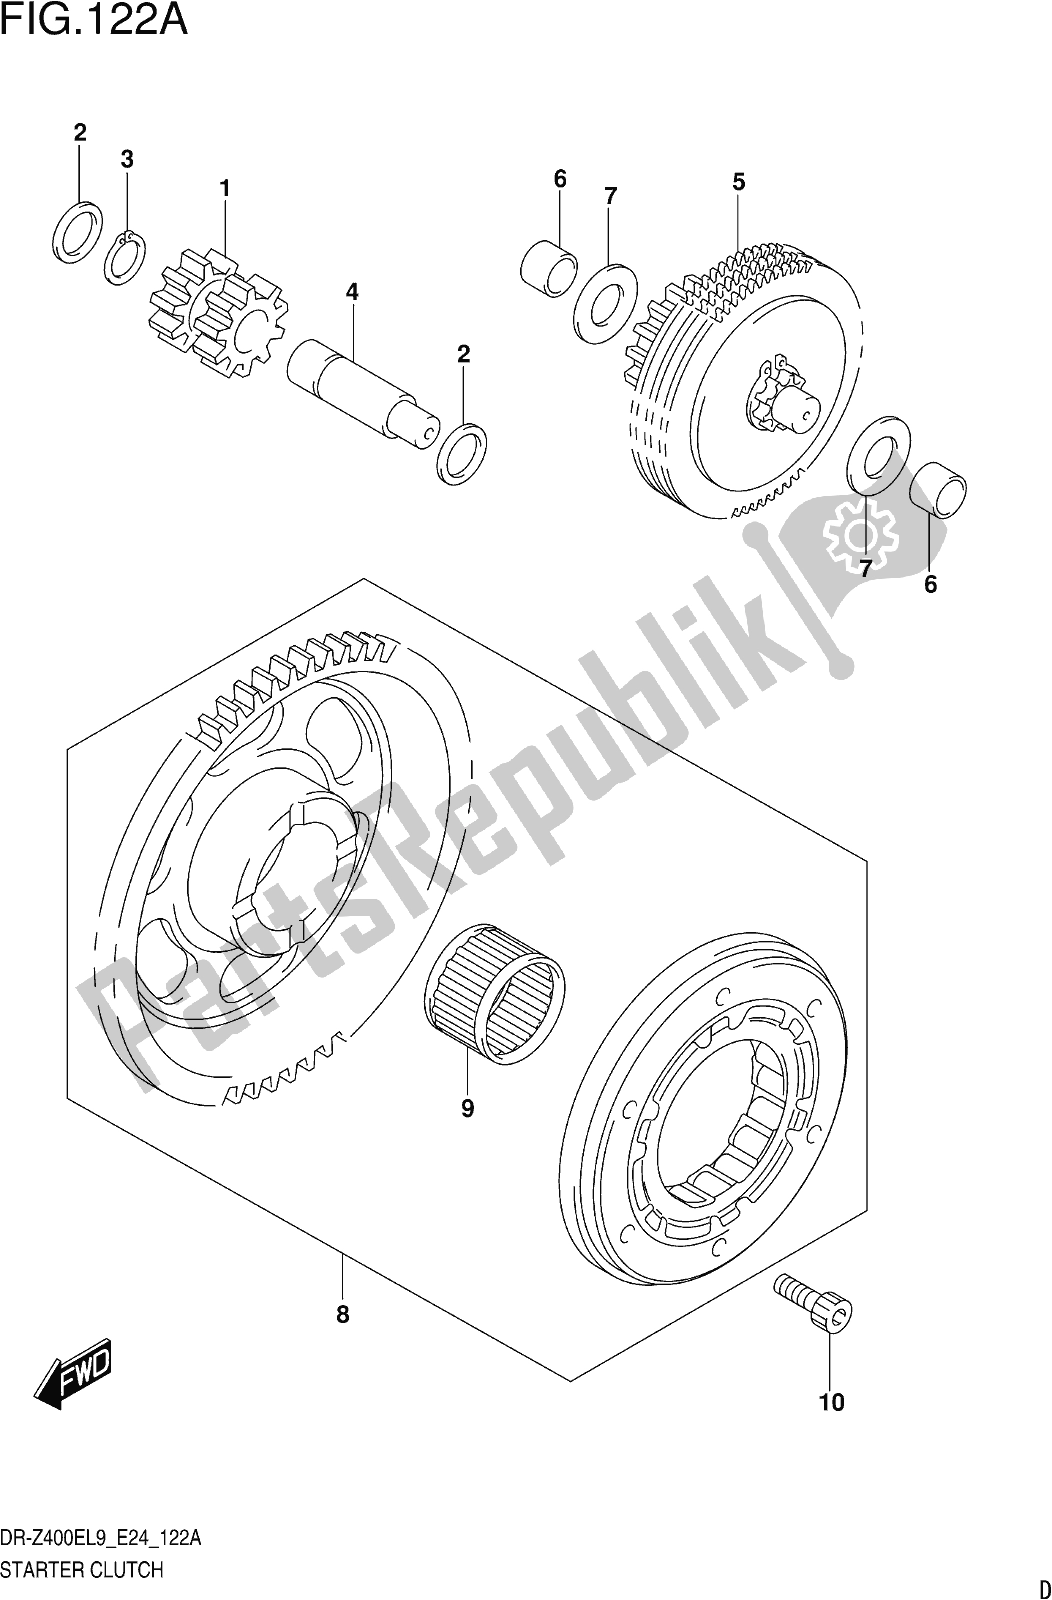 All parts for the Fig. 122a Starter Clutch of the Suzuki DR-Z 400E 2019